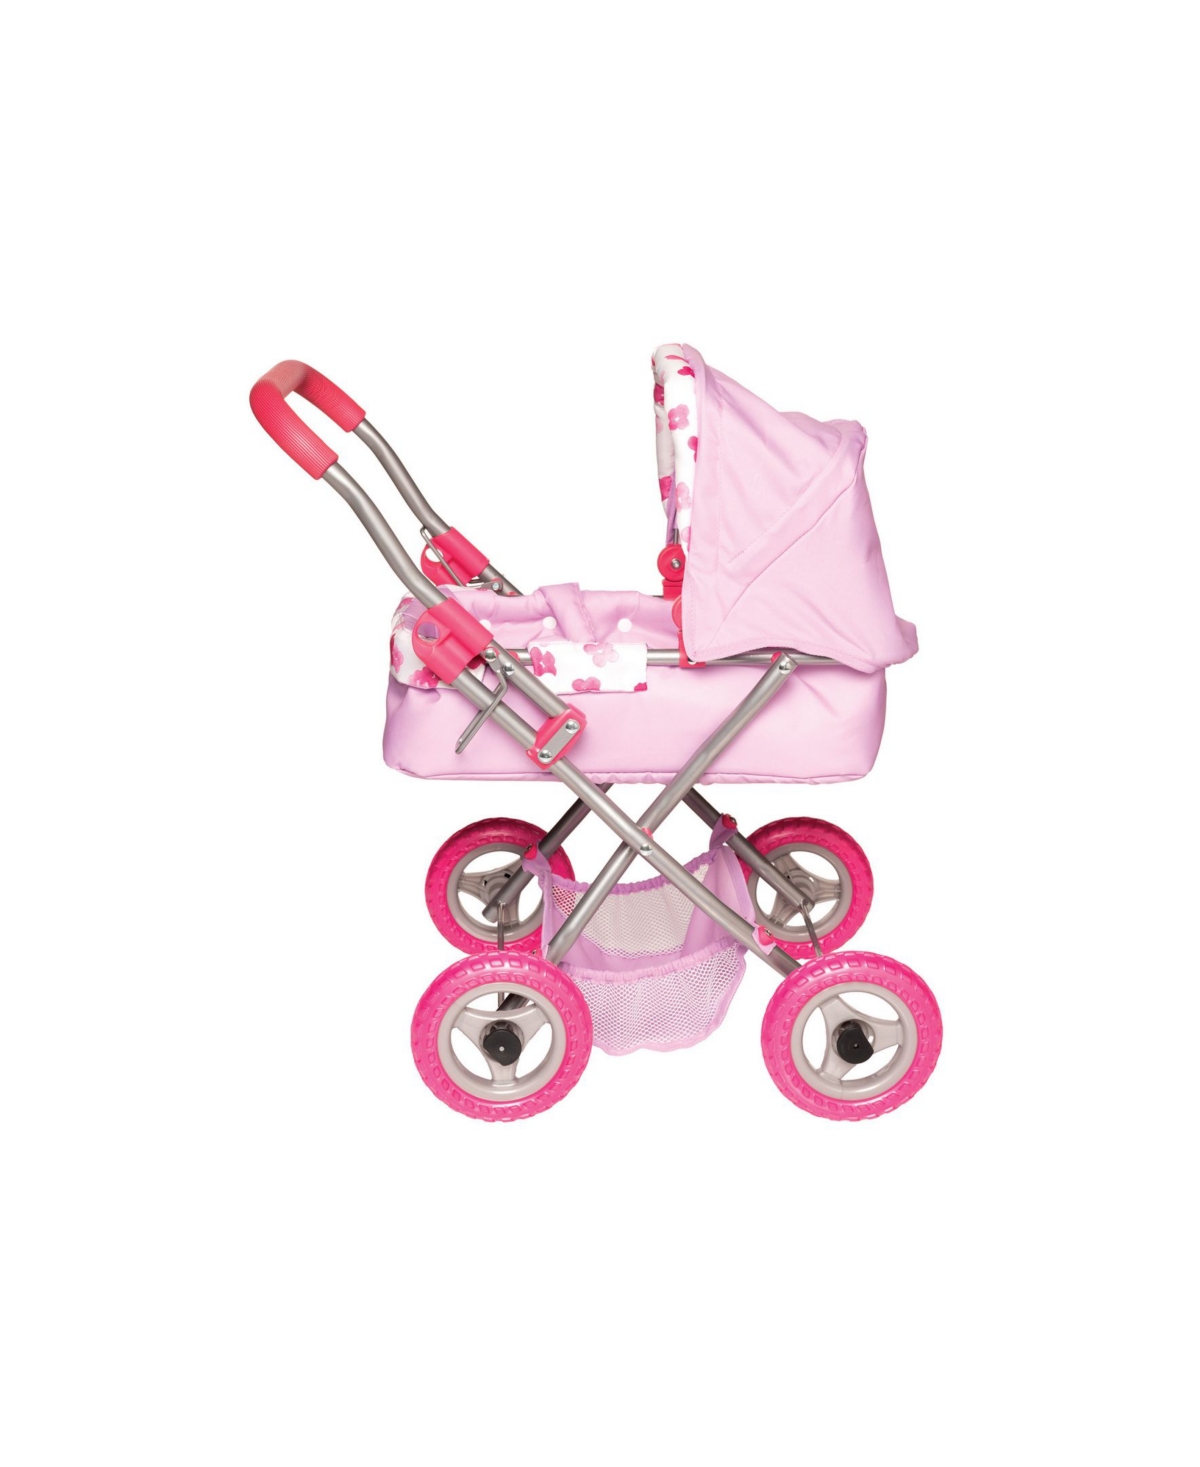 Manhattan Toy Company Stella Collection Baby Doll Buggy For 12" And 15" Toy Dolls In Multi